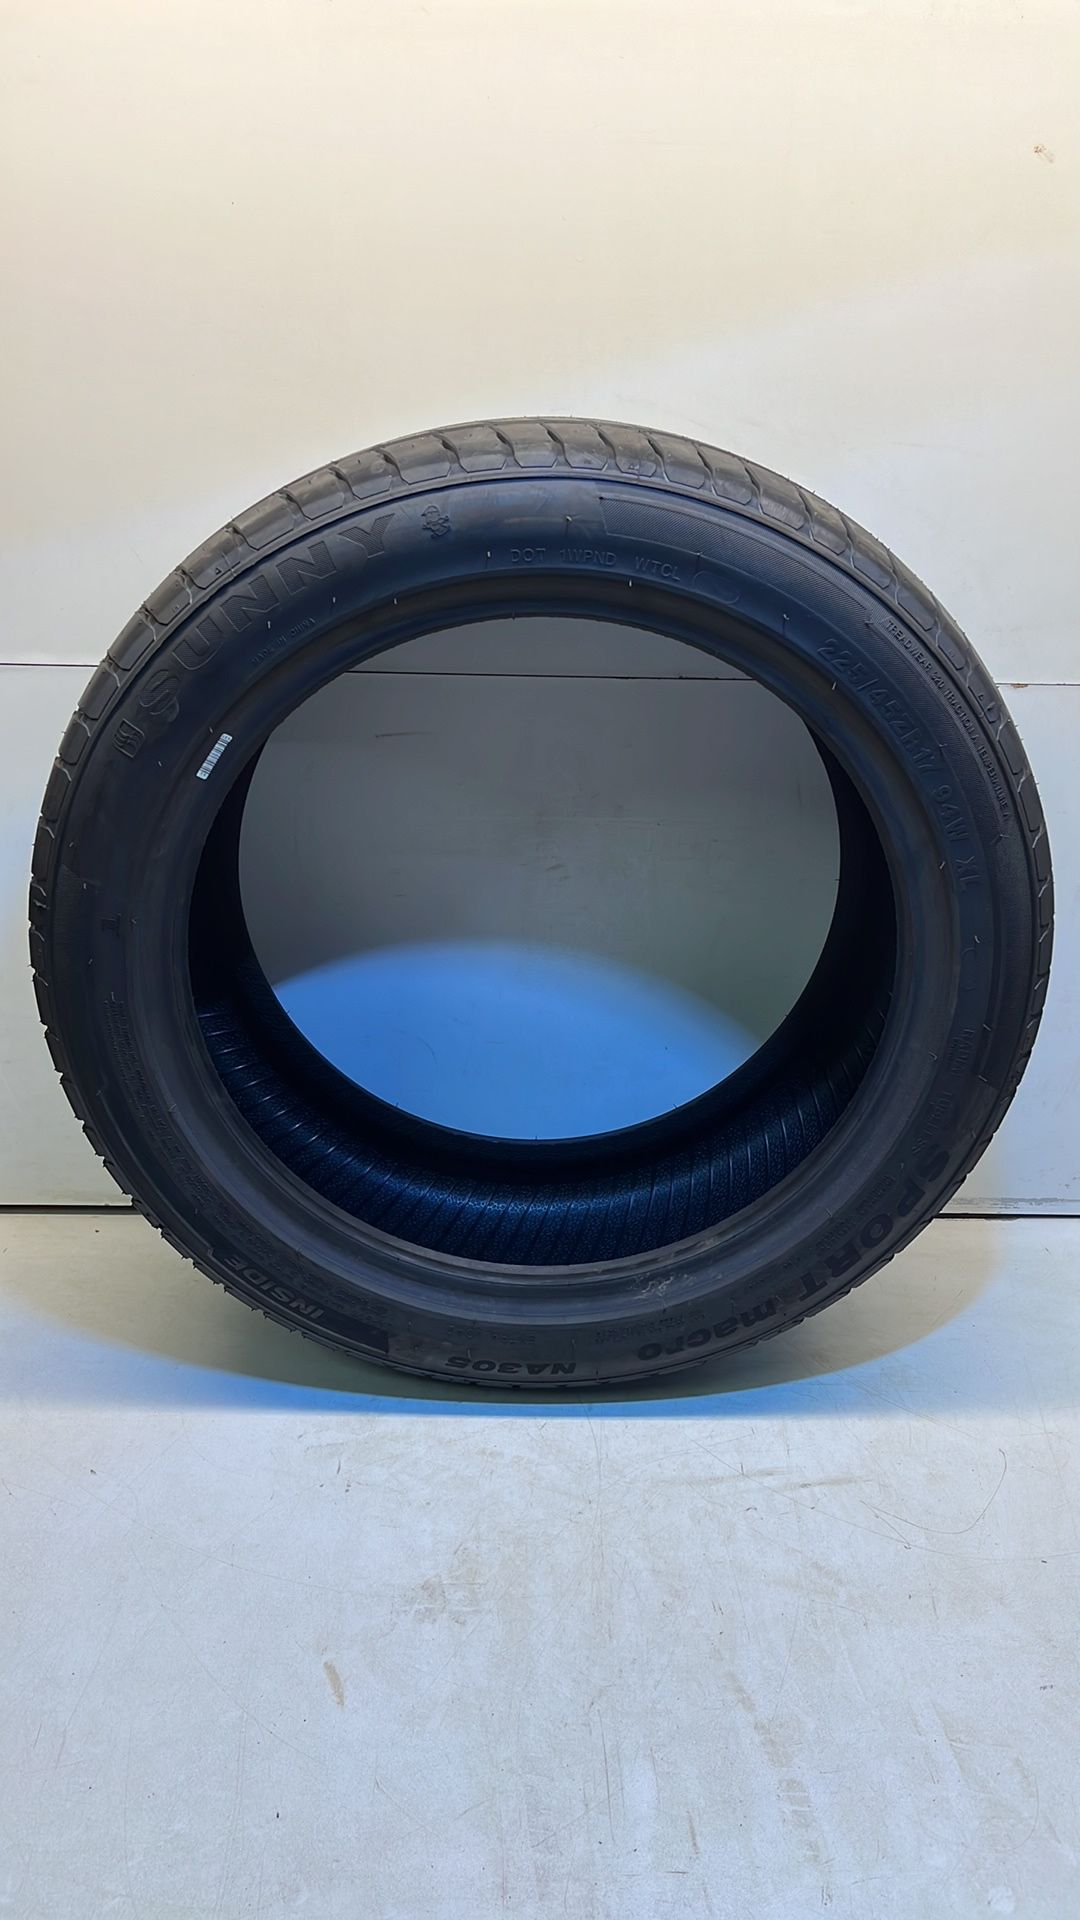 Sunny | NA305 | 225/45ZR17 Tyre - Image 3 of 5